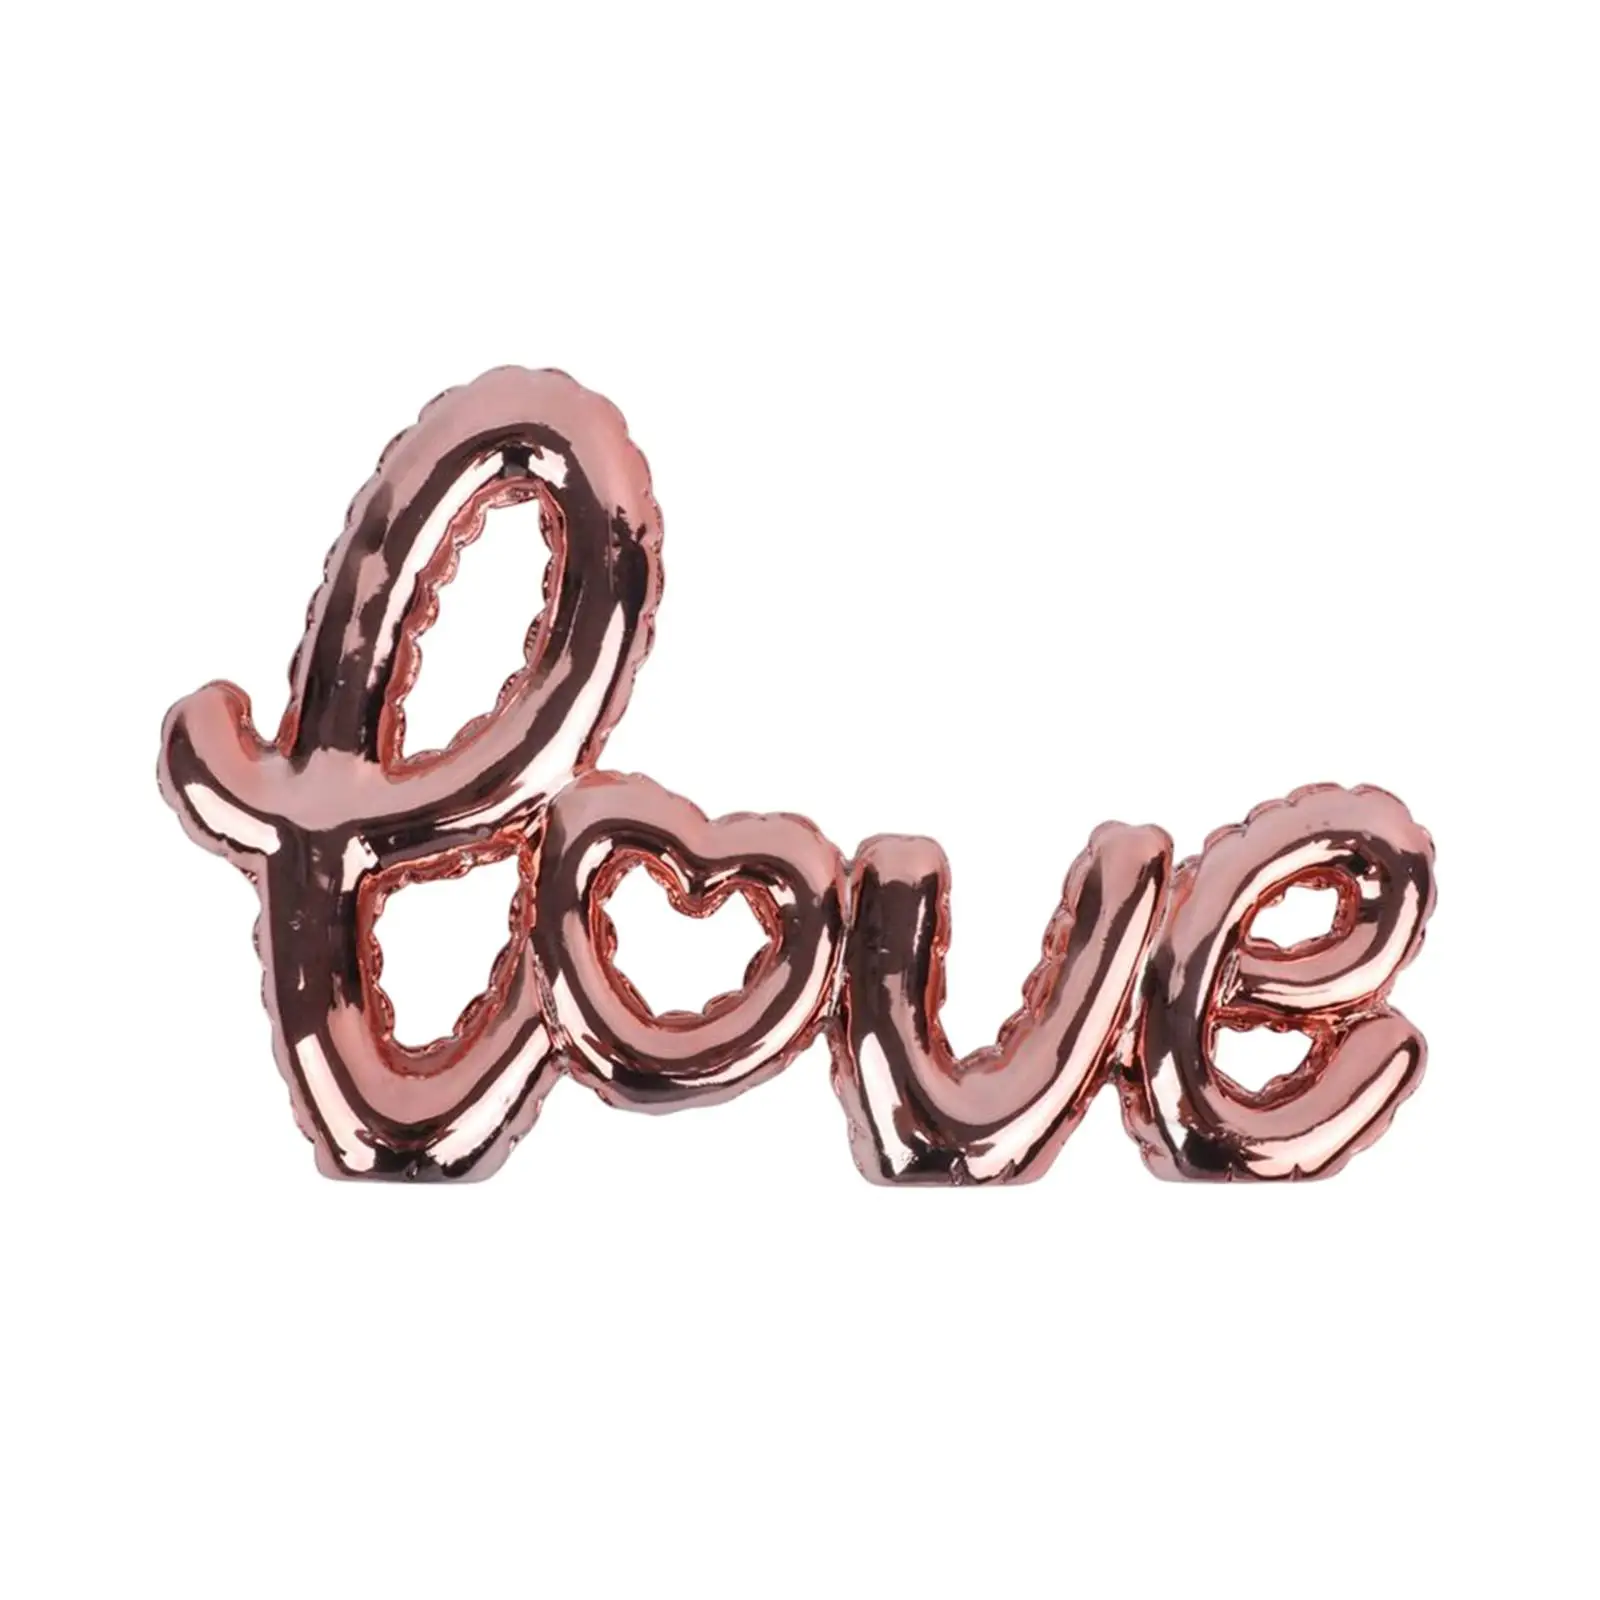 Love Signs Letters Modern Art Ornament Resin Signs Love Letters Statue for Bedroom Farmhouse Anniversary Tabletop Decoration